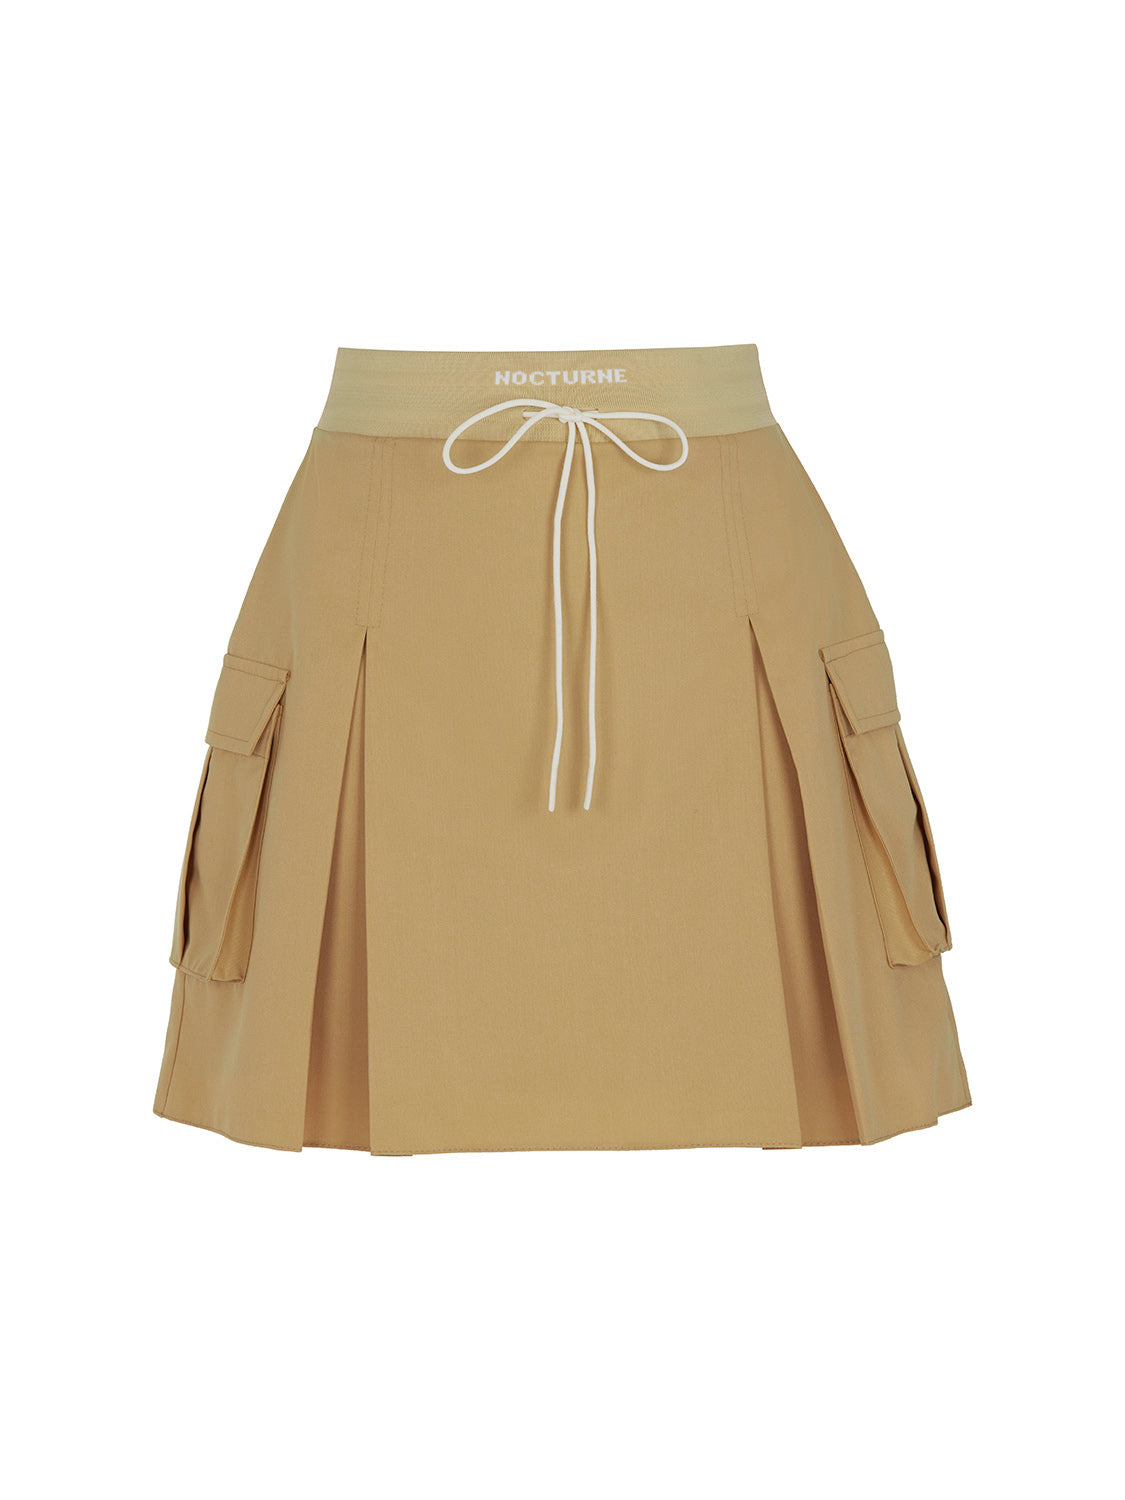 Nocturne Women's Brown High-waisted Ribbed Mini Skirt